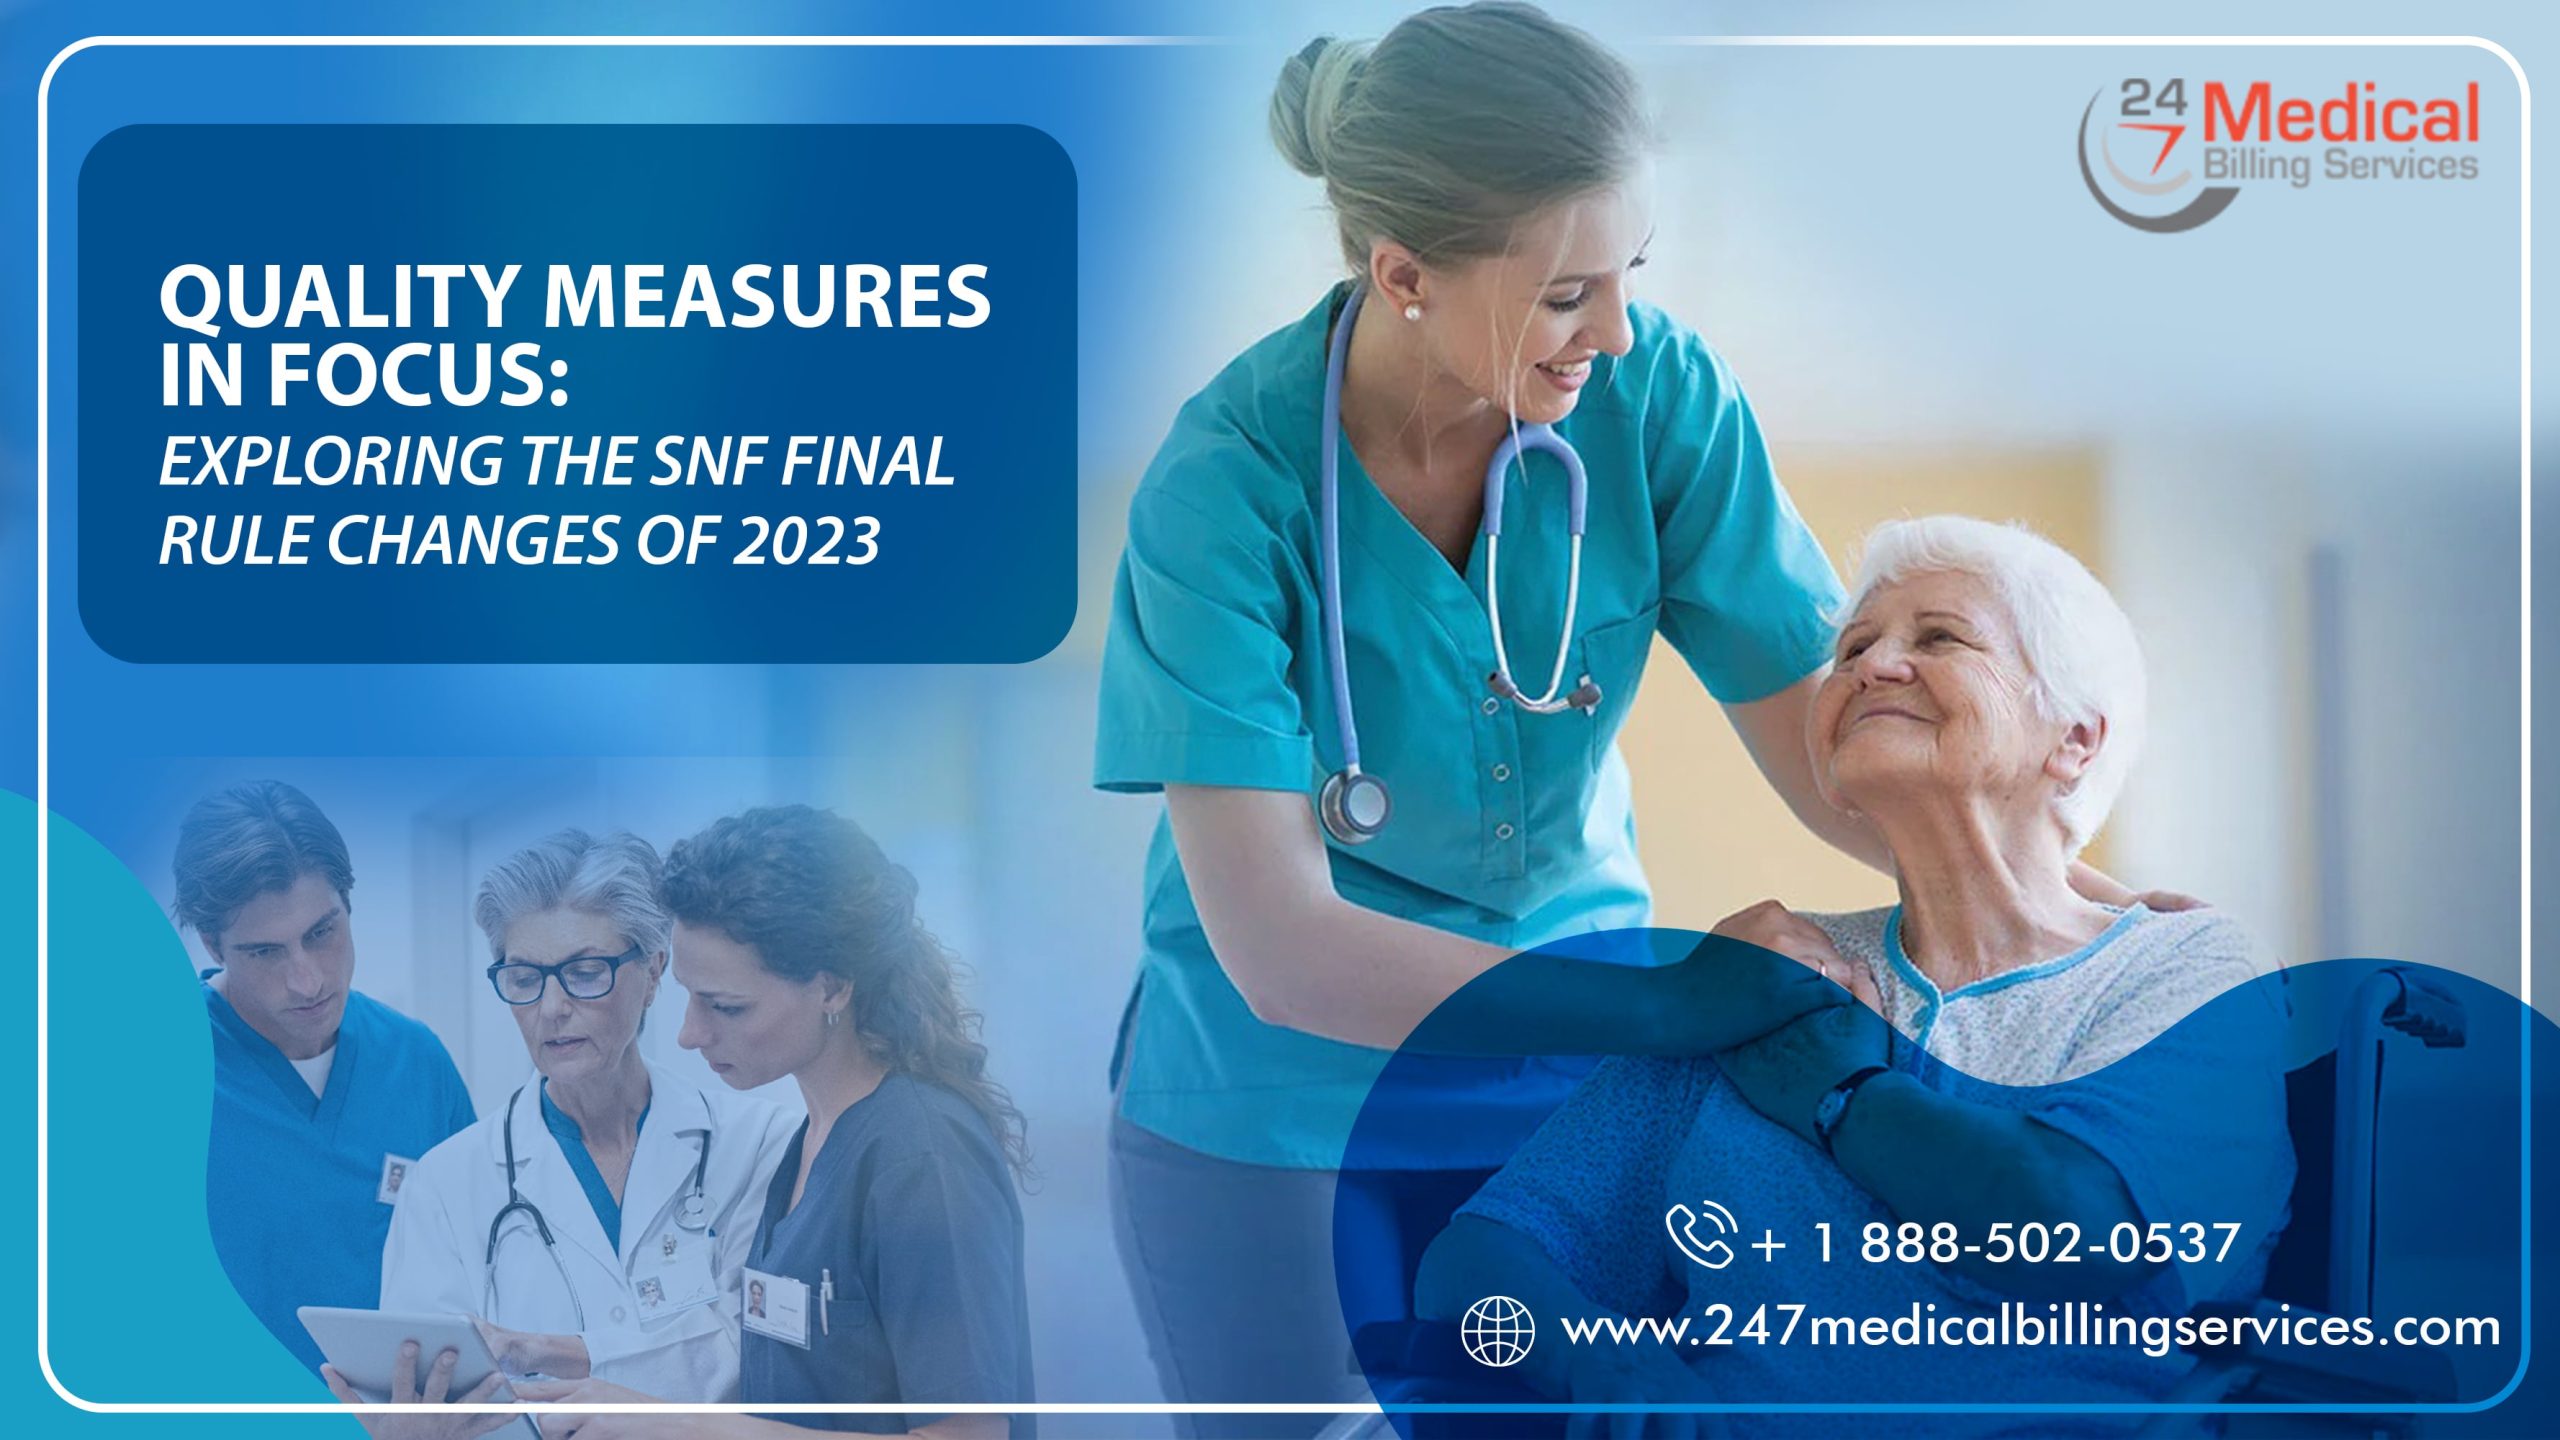  Quality Measures in Focus: Exploring the SNF Final Rule Changes of 2023